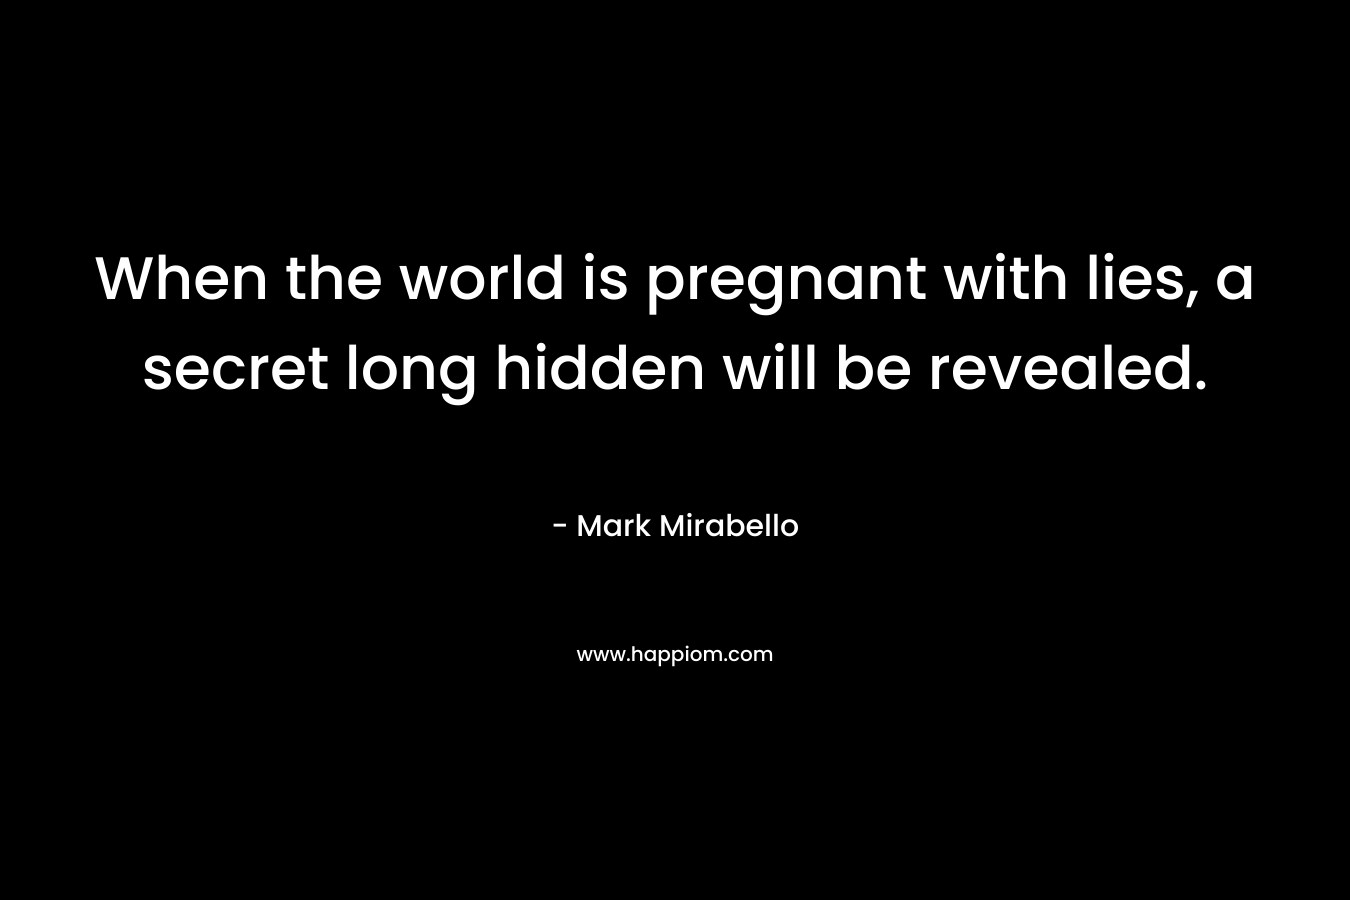 When the world is pregnant with lies, a secret long hidden will be revealed. – Mark Mirabello